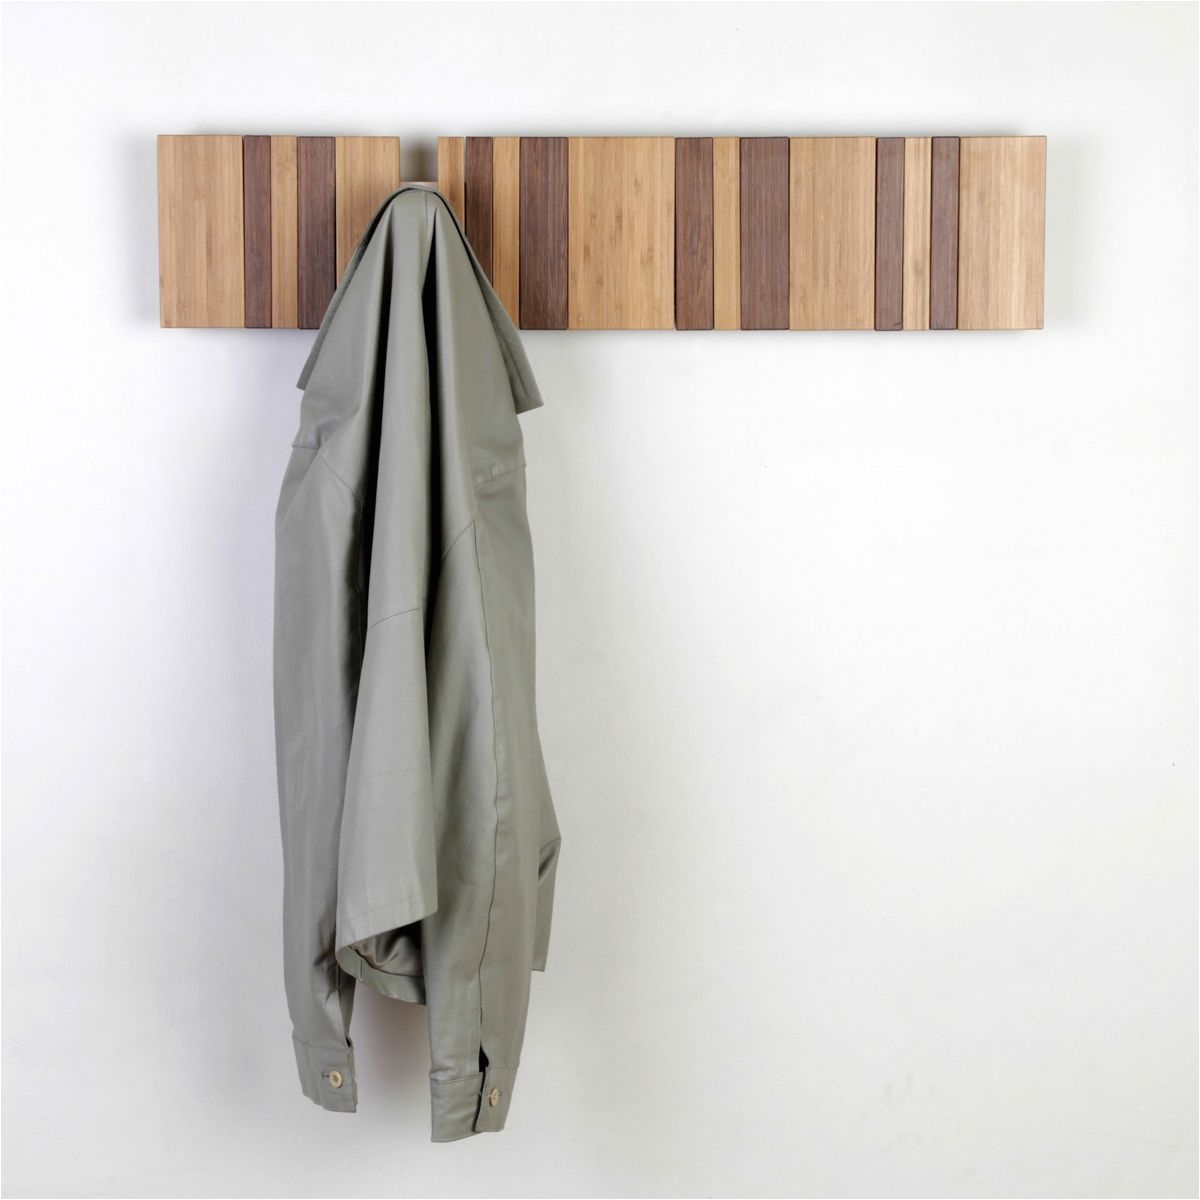 a piece of art or a cool coat rack the dark slats pull